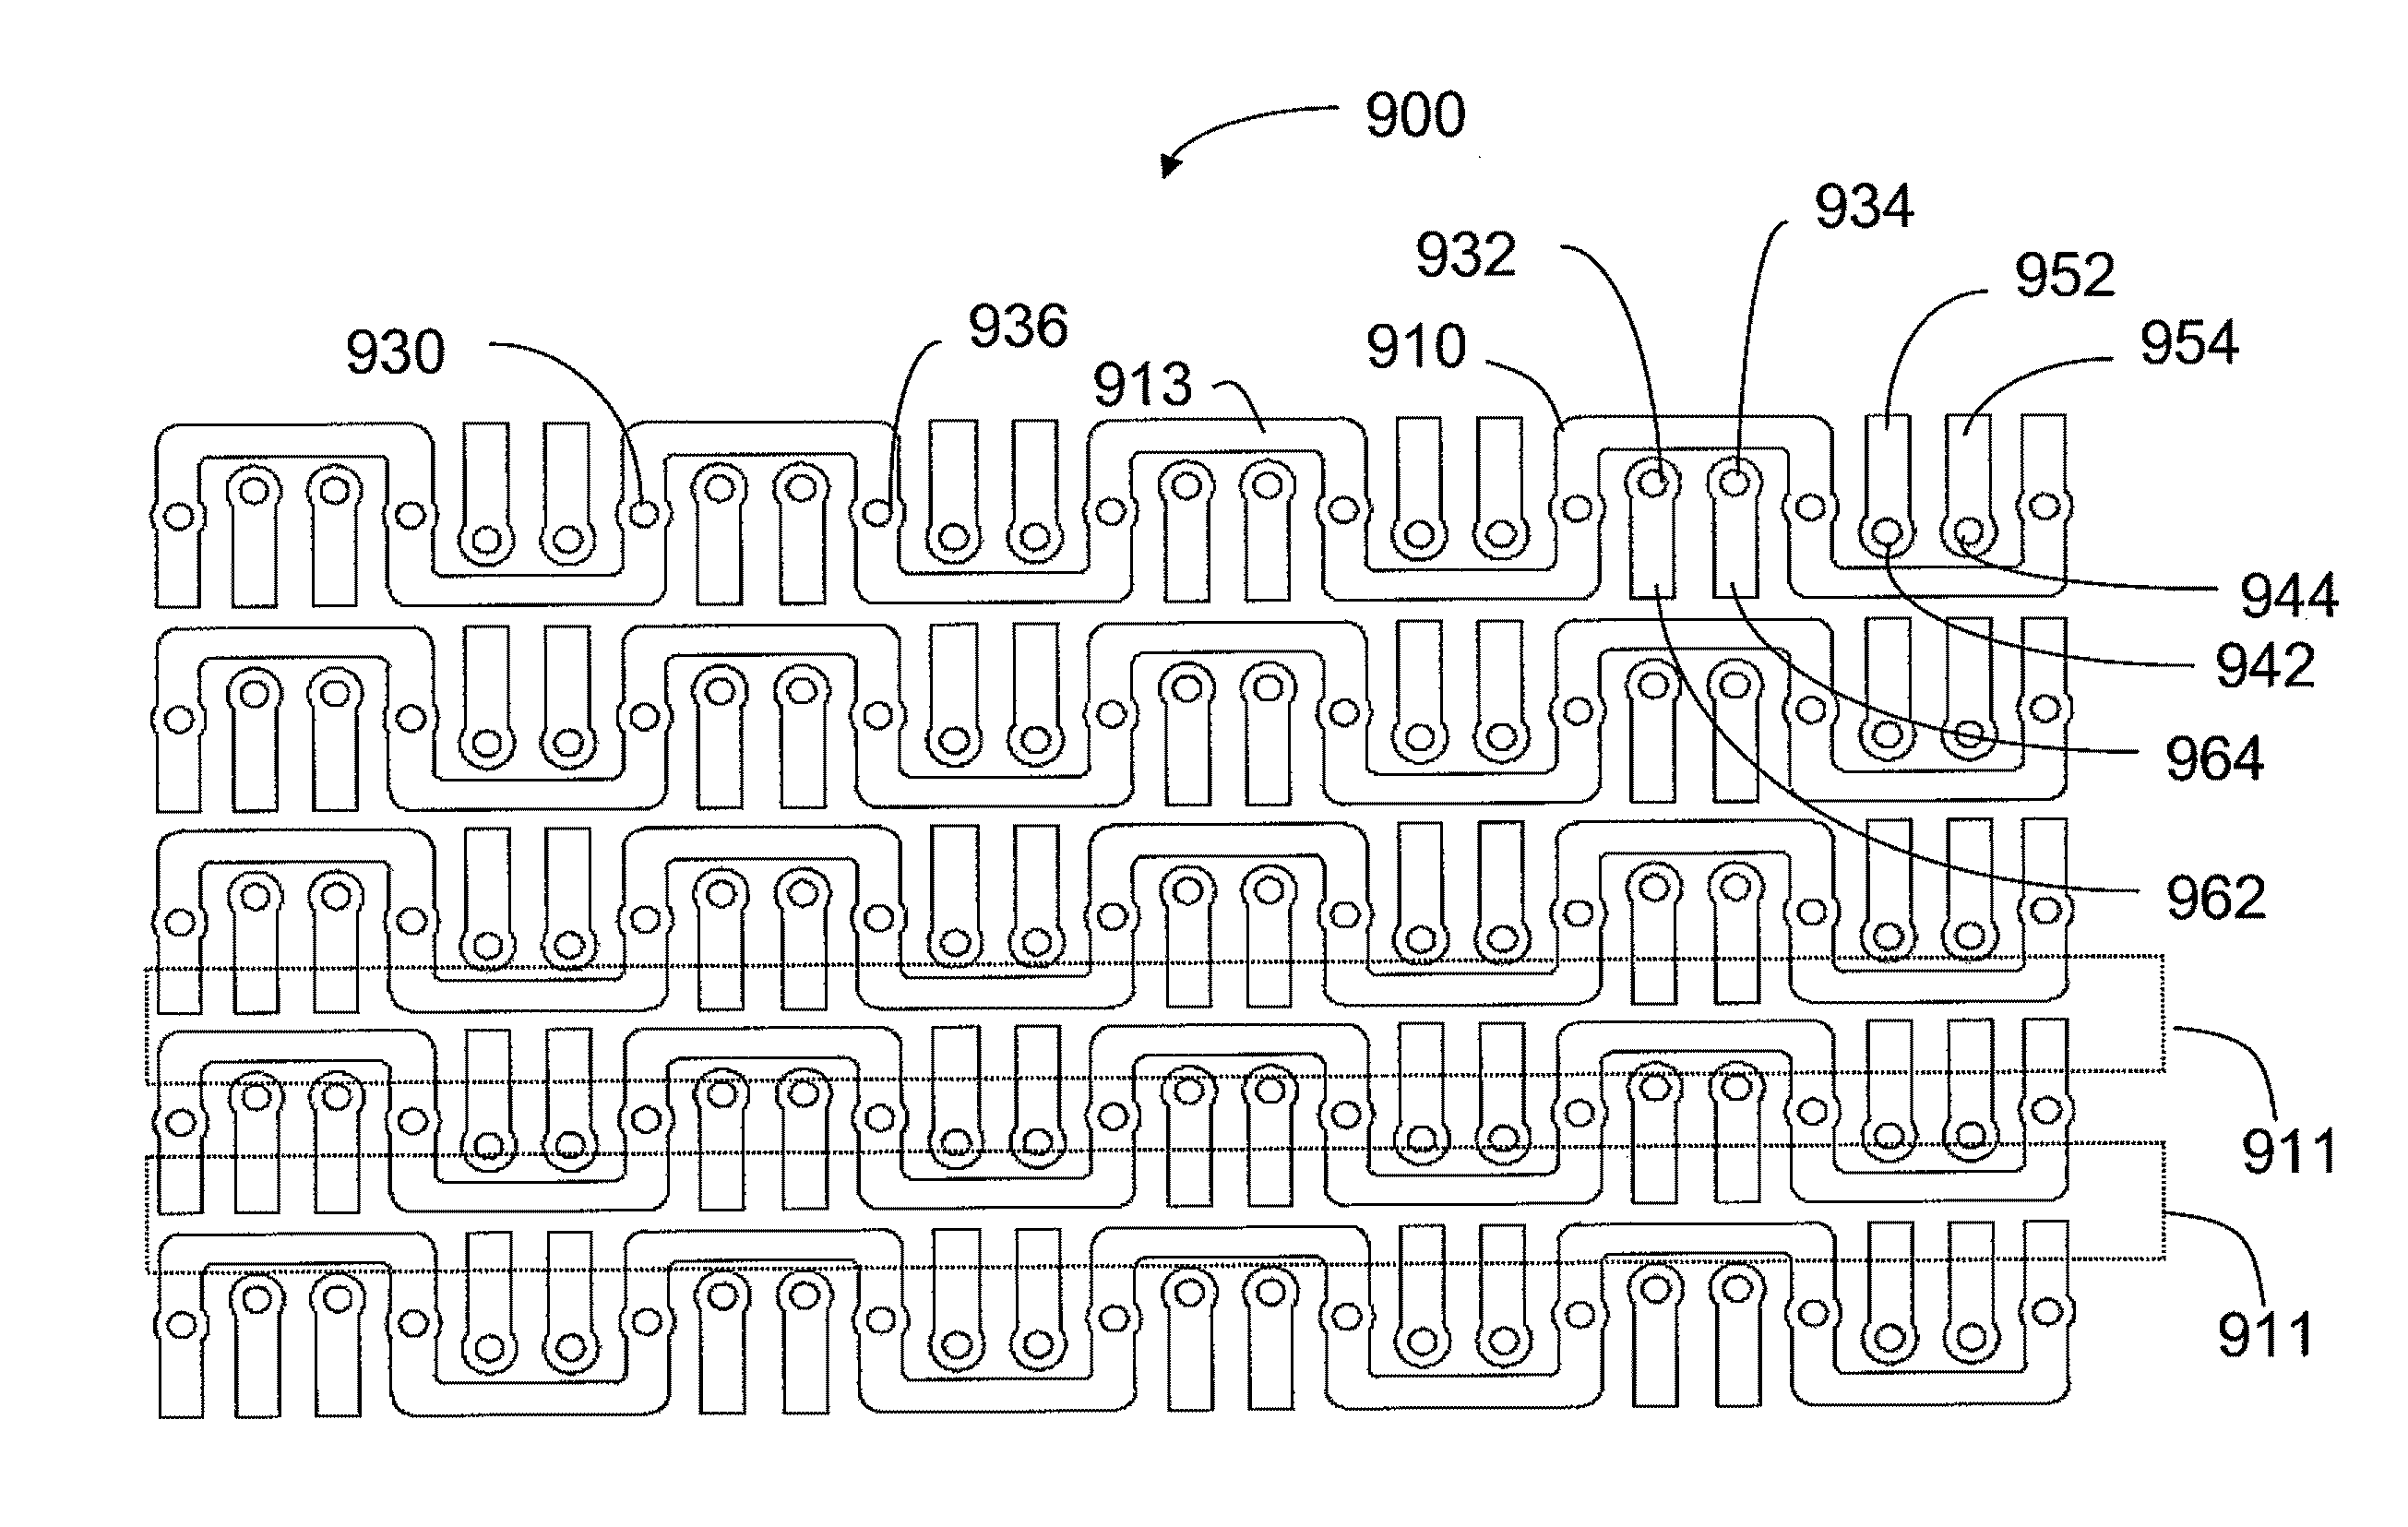 High density electrical connector and PCB footprint